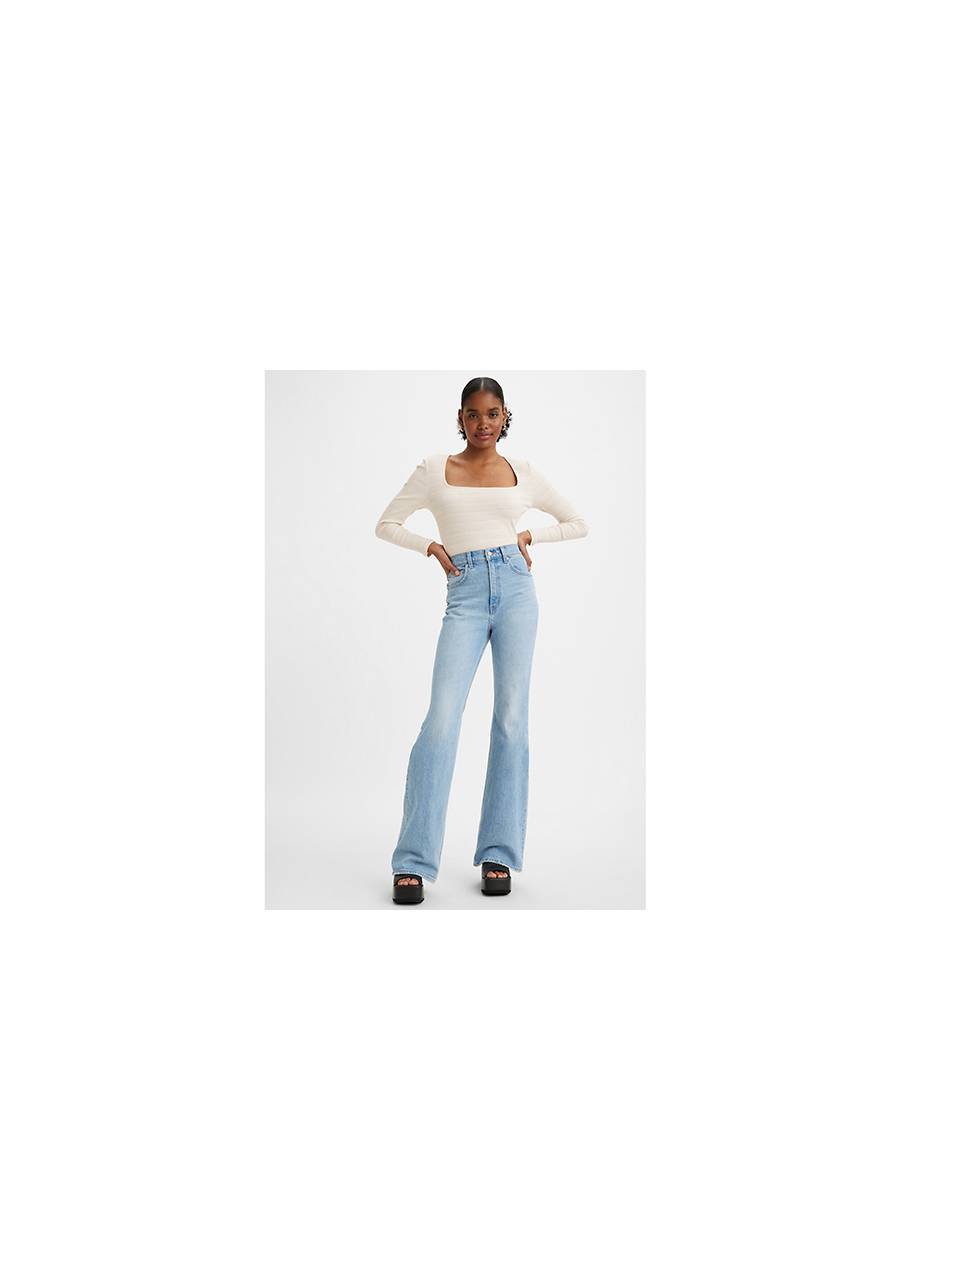 High-Waisted Jeans - Women's High-Rise Jeans & Pants | Levi’s® US